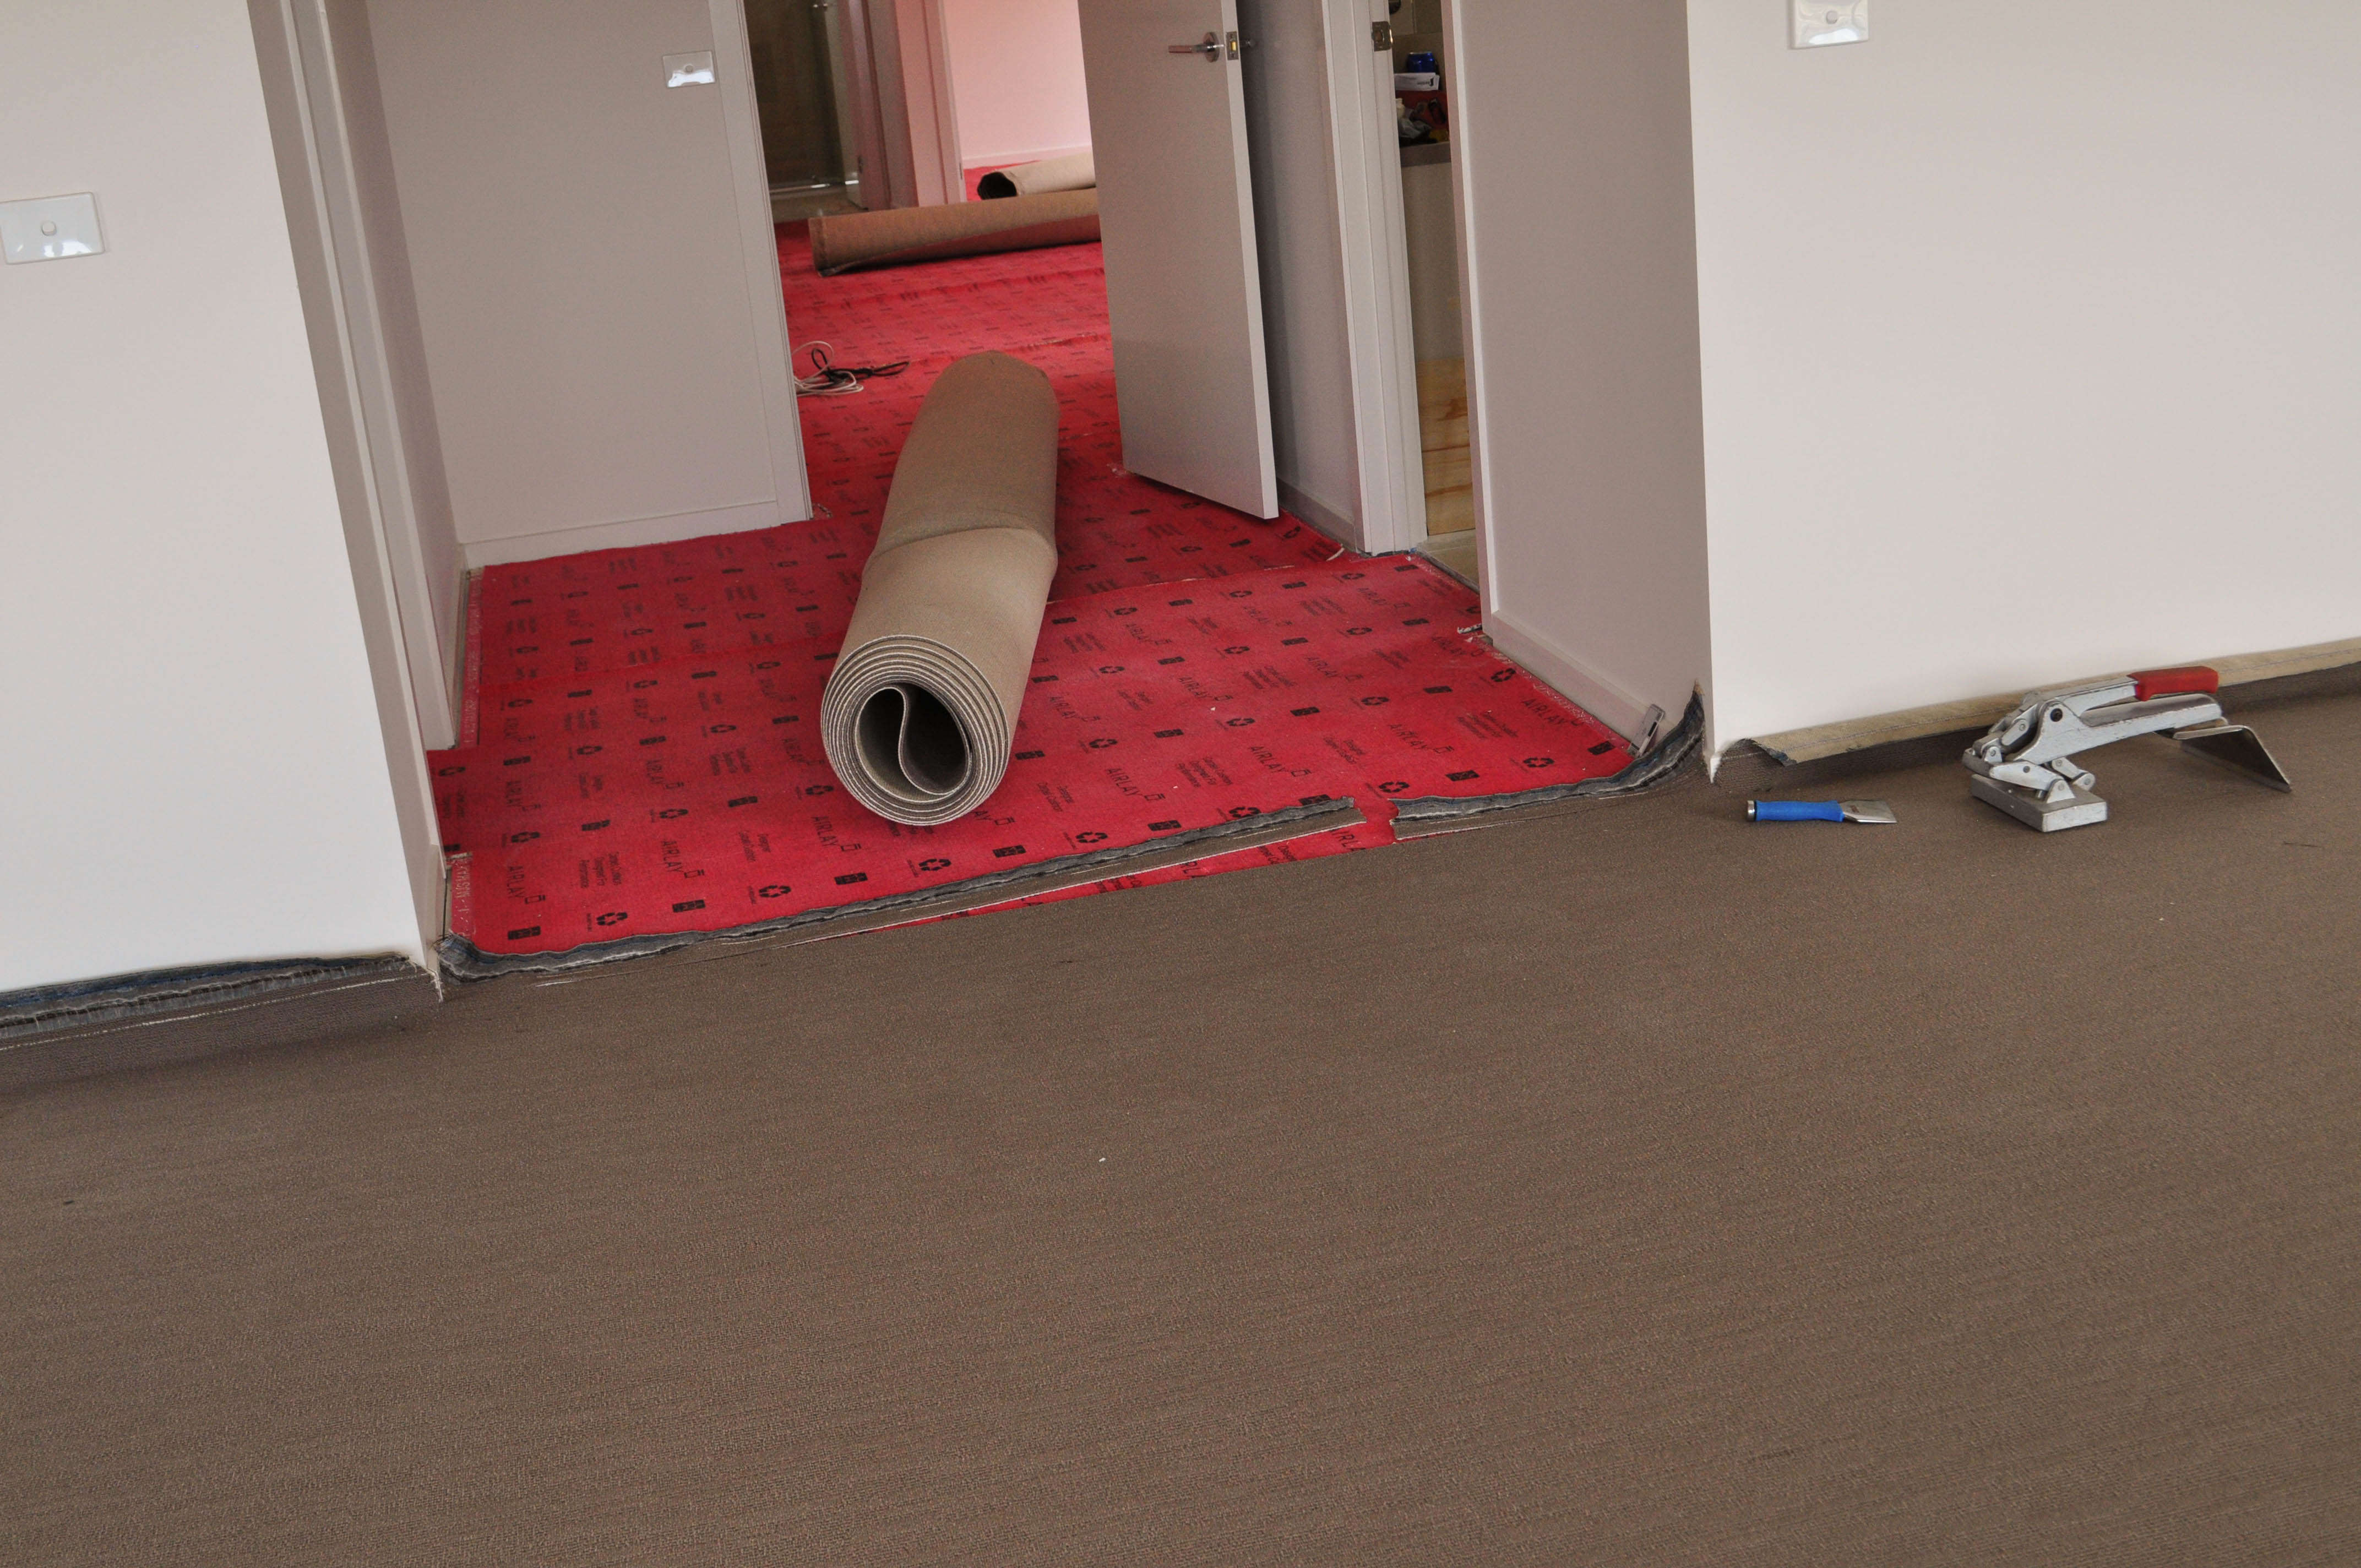 showing a lounge room from which a wide passage runs. the passage has gripper on the floor against the walls and underlay between the gripper
 covering the whole floor. On top of the underlay is a roll of carpet pre-cut to size ready to be laid on the floor. The lounge room has carpet stretched and tensioned ready to be joined
 to the passage carpet. The carpet laying in full swing as part of the carpet installation procedure. The home is in Point Cook, Werribee. The carpet laying was done by 
 Concord Floors.Vic. 3030.